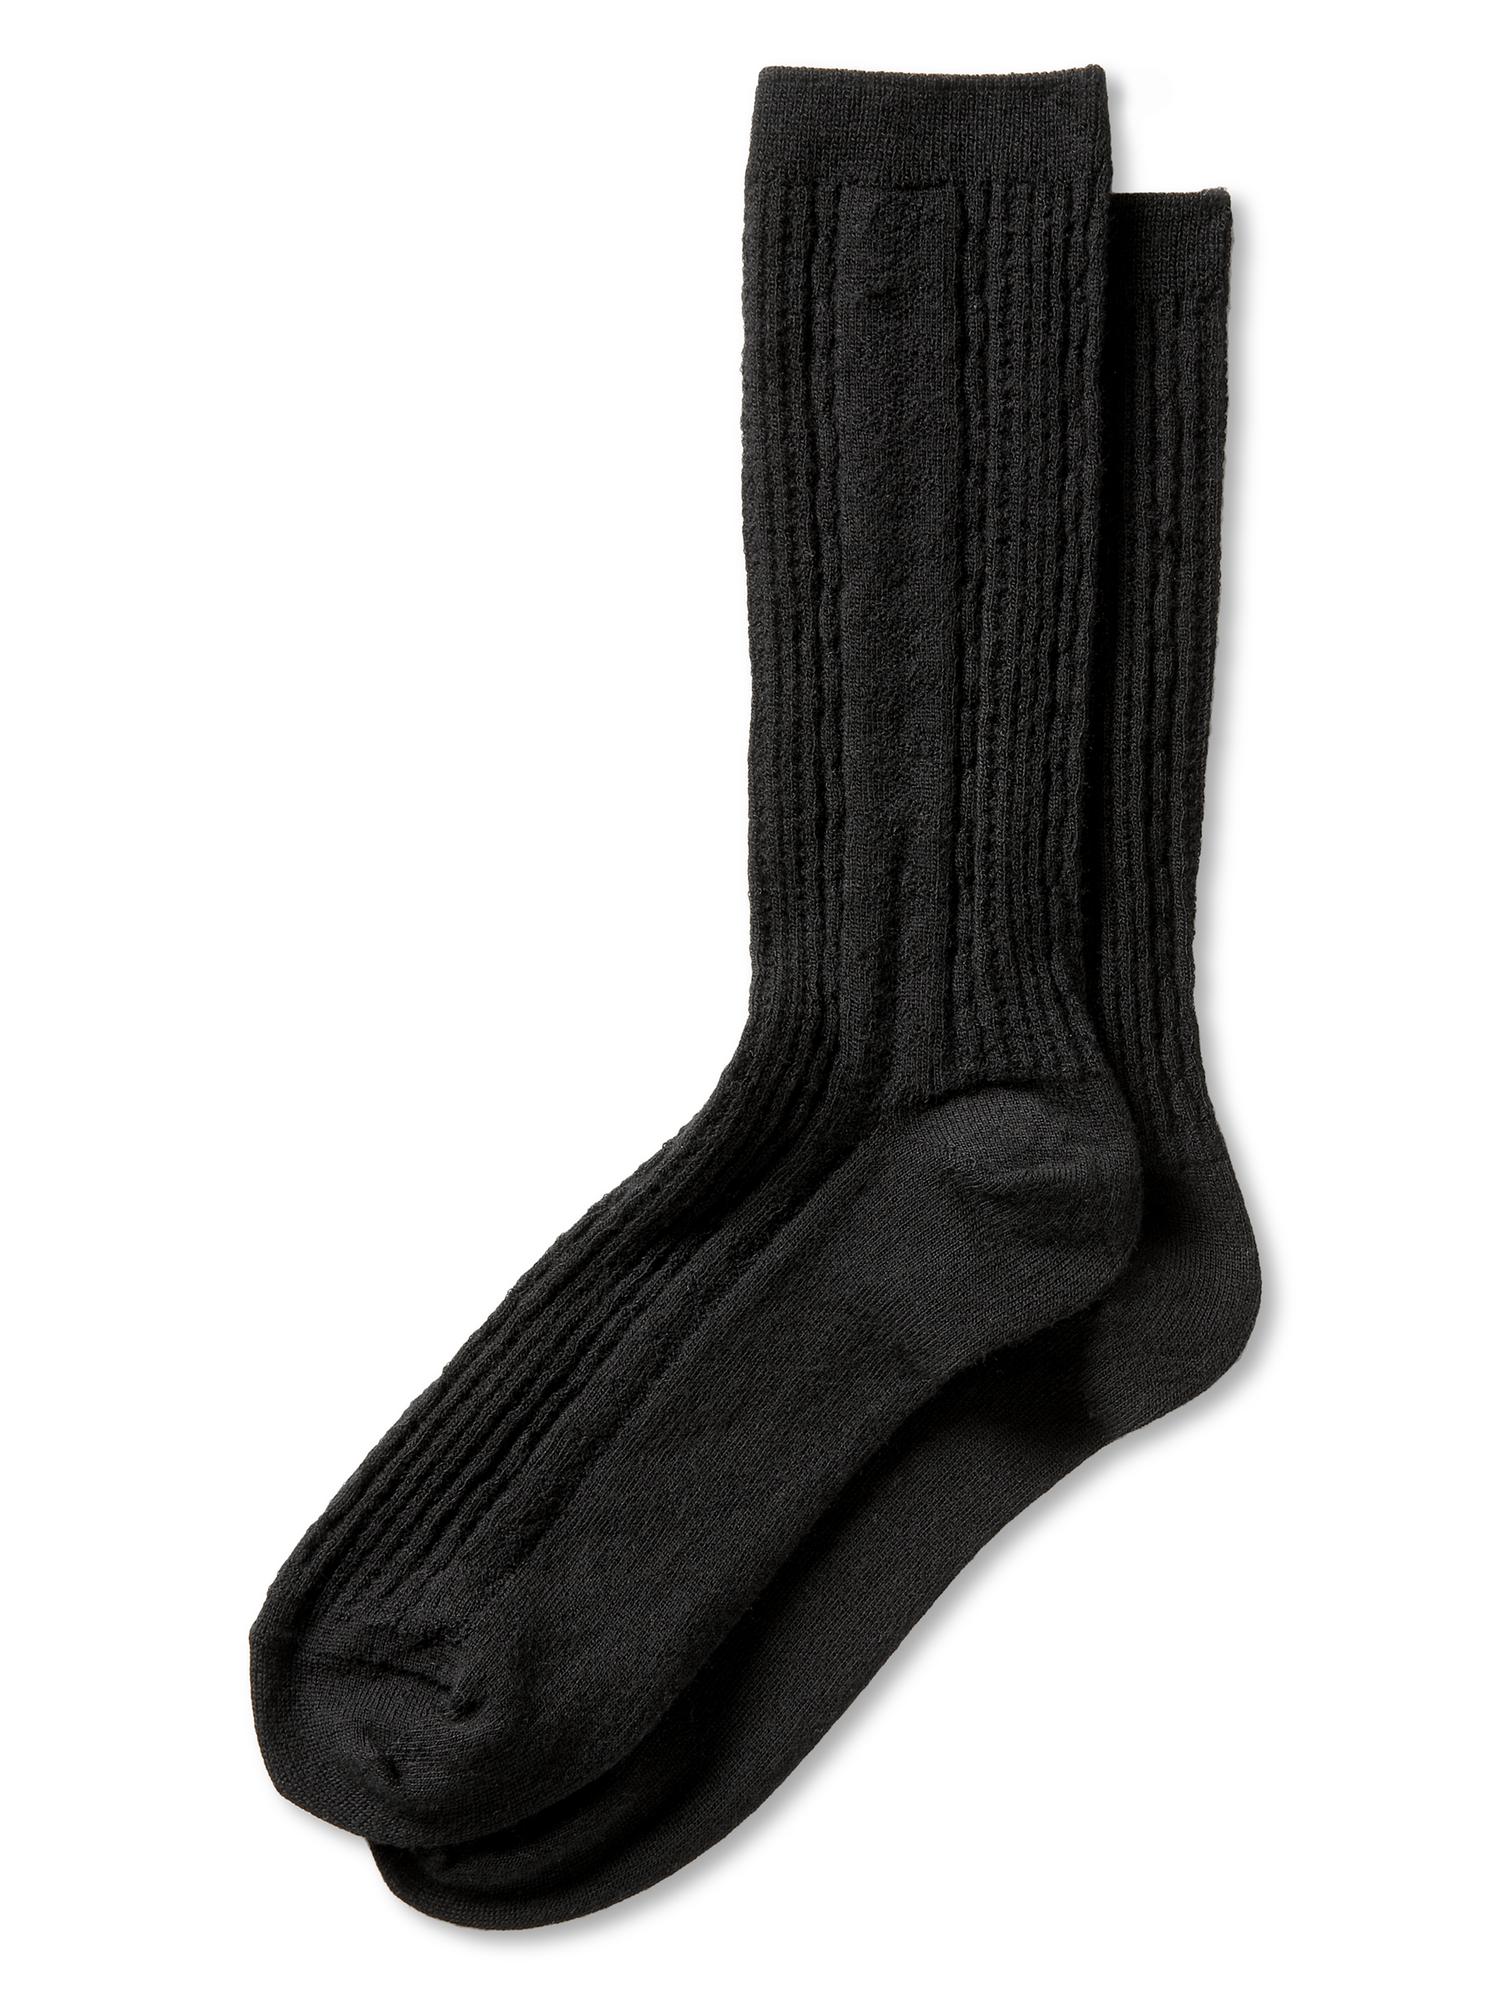 Basic cable trouser sock